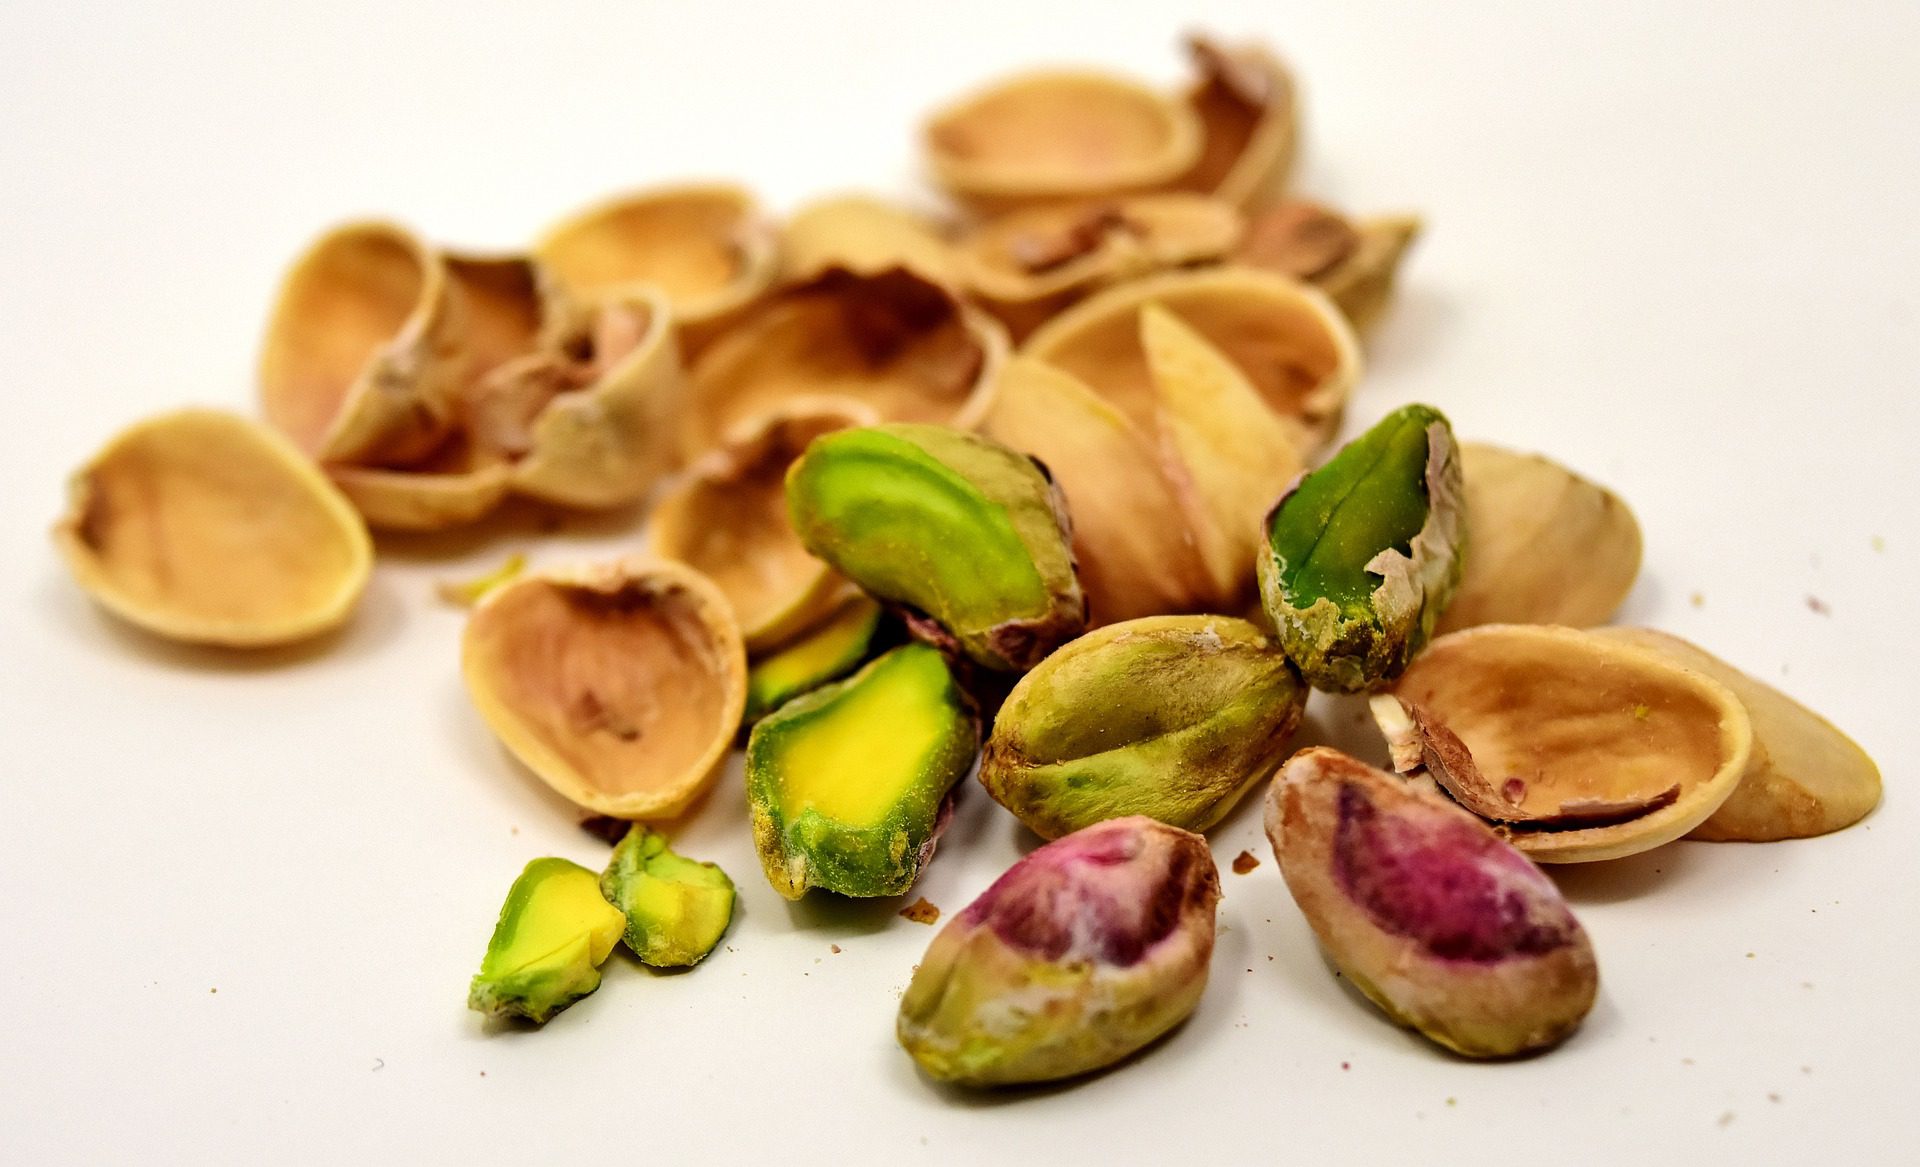 BRONTE PISTACHIO: THE GREEN GOLD OF SICILY IN THE WORLD